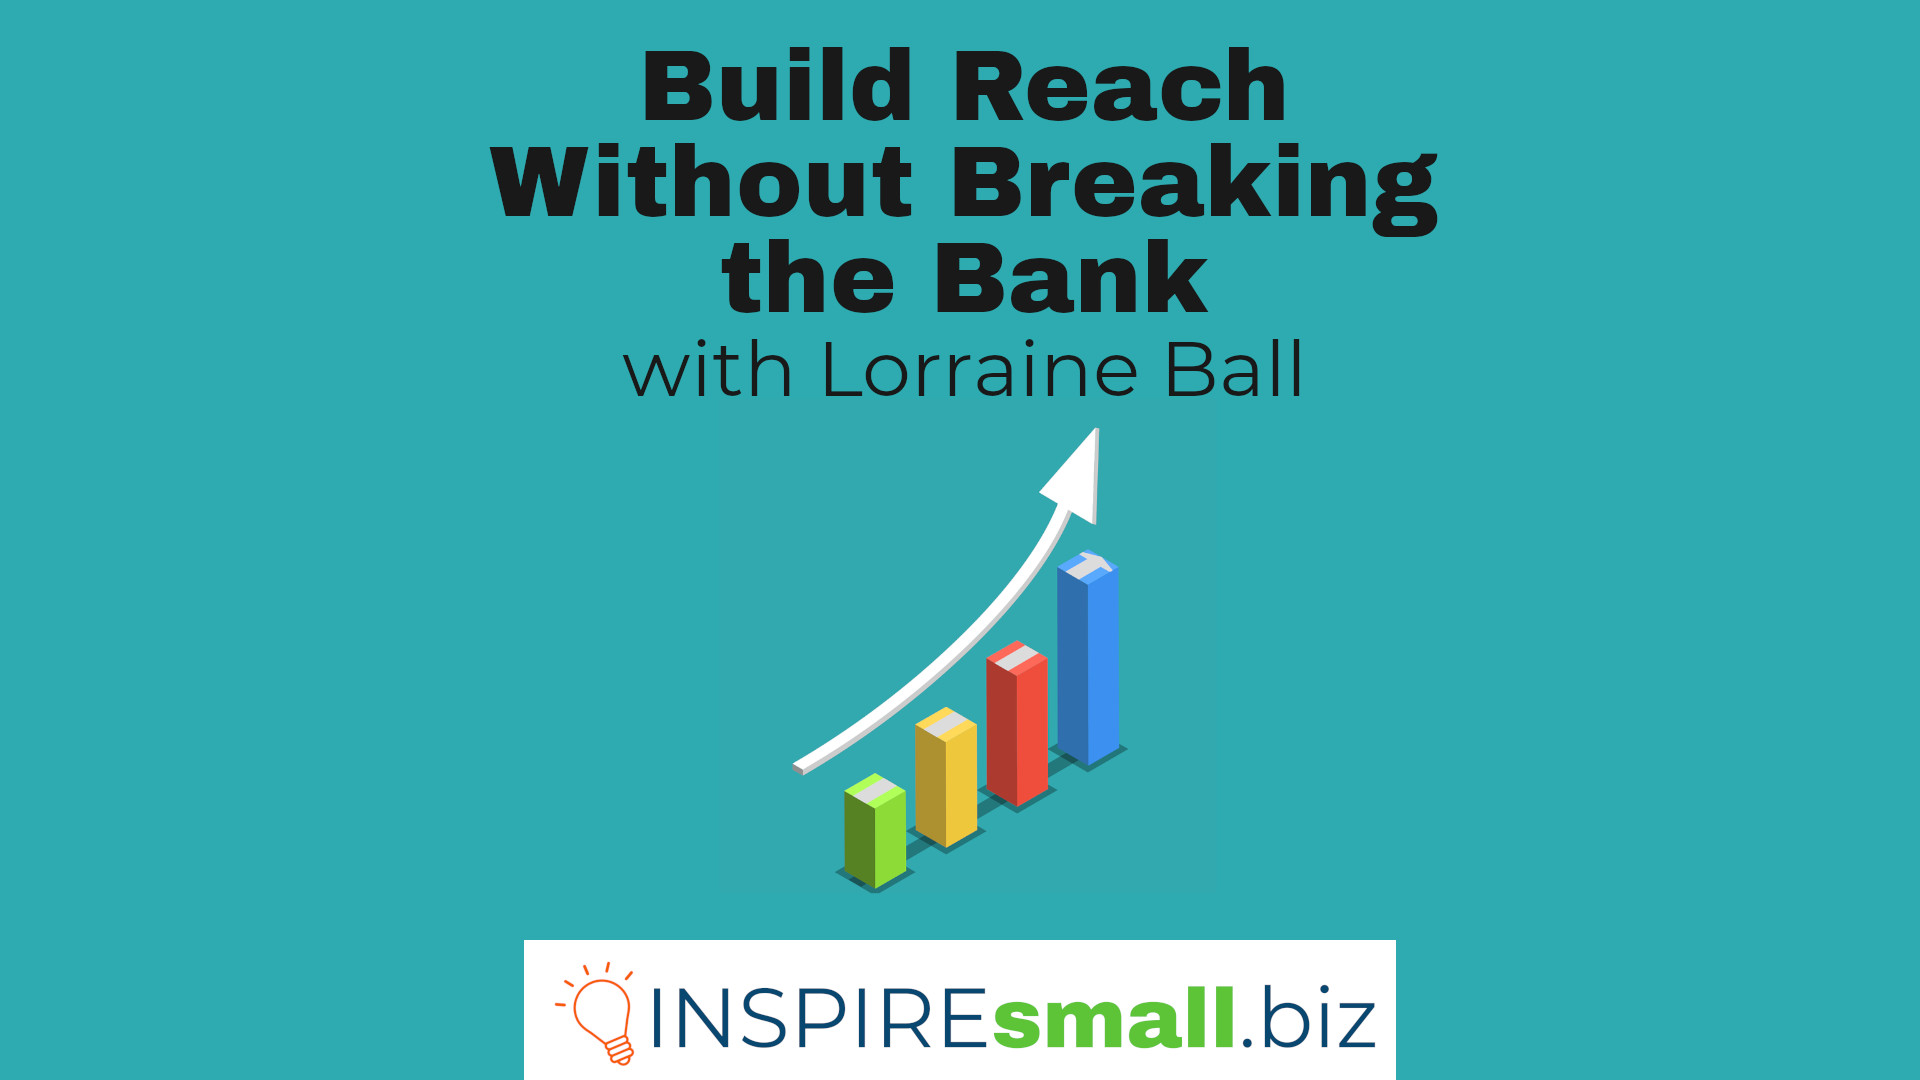 Build Reach Without Breaking the Bank